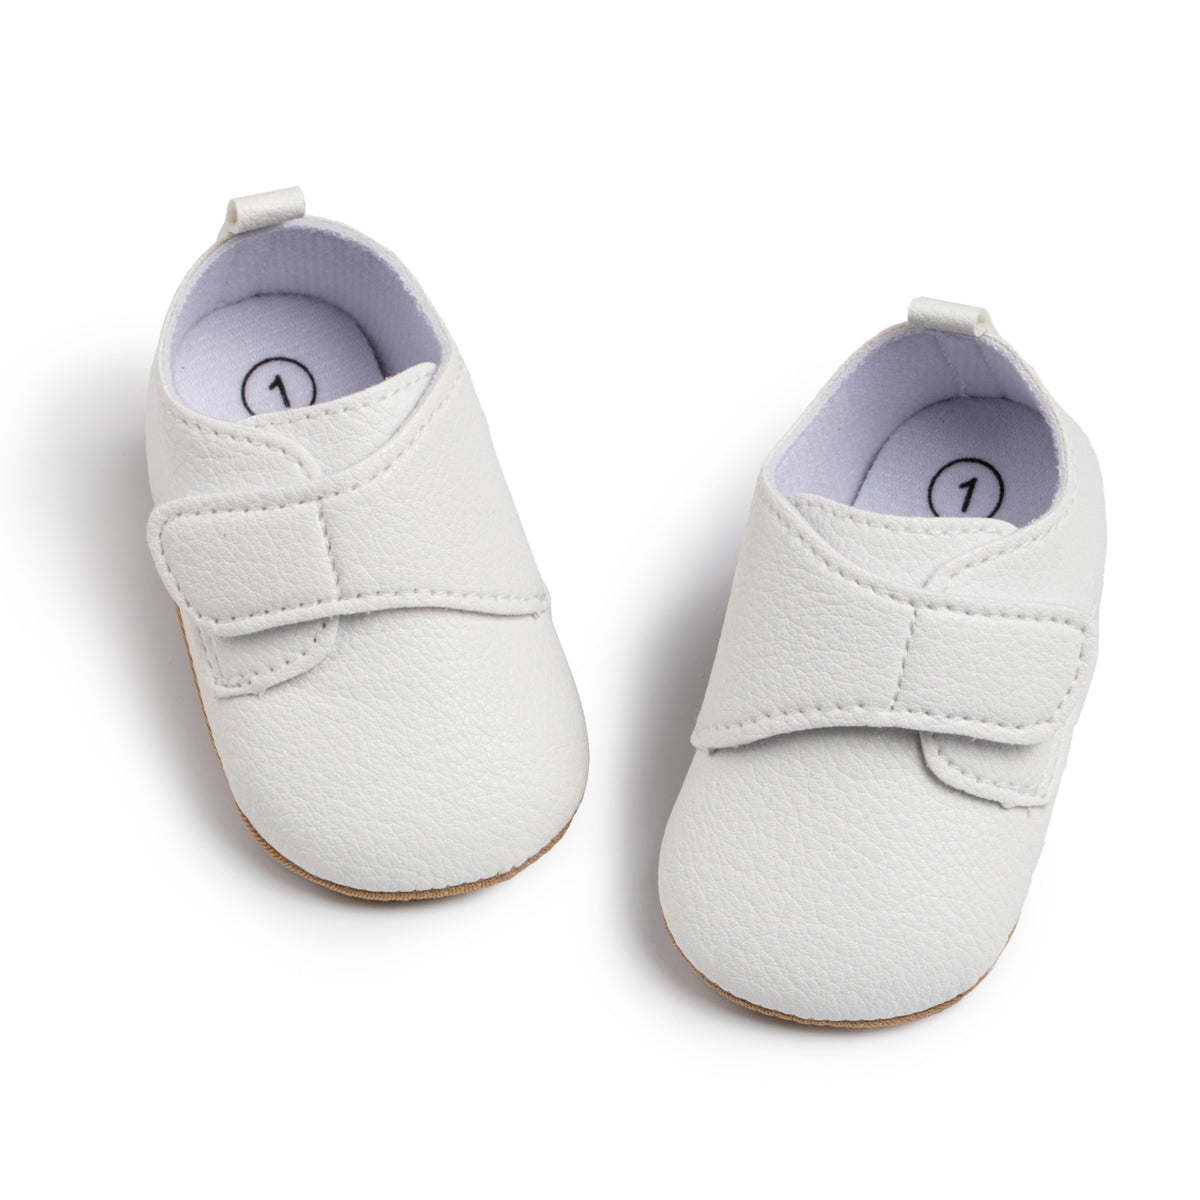 Finley Soft Sole Shoes - White